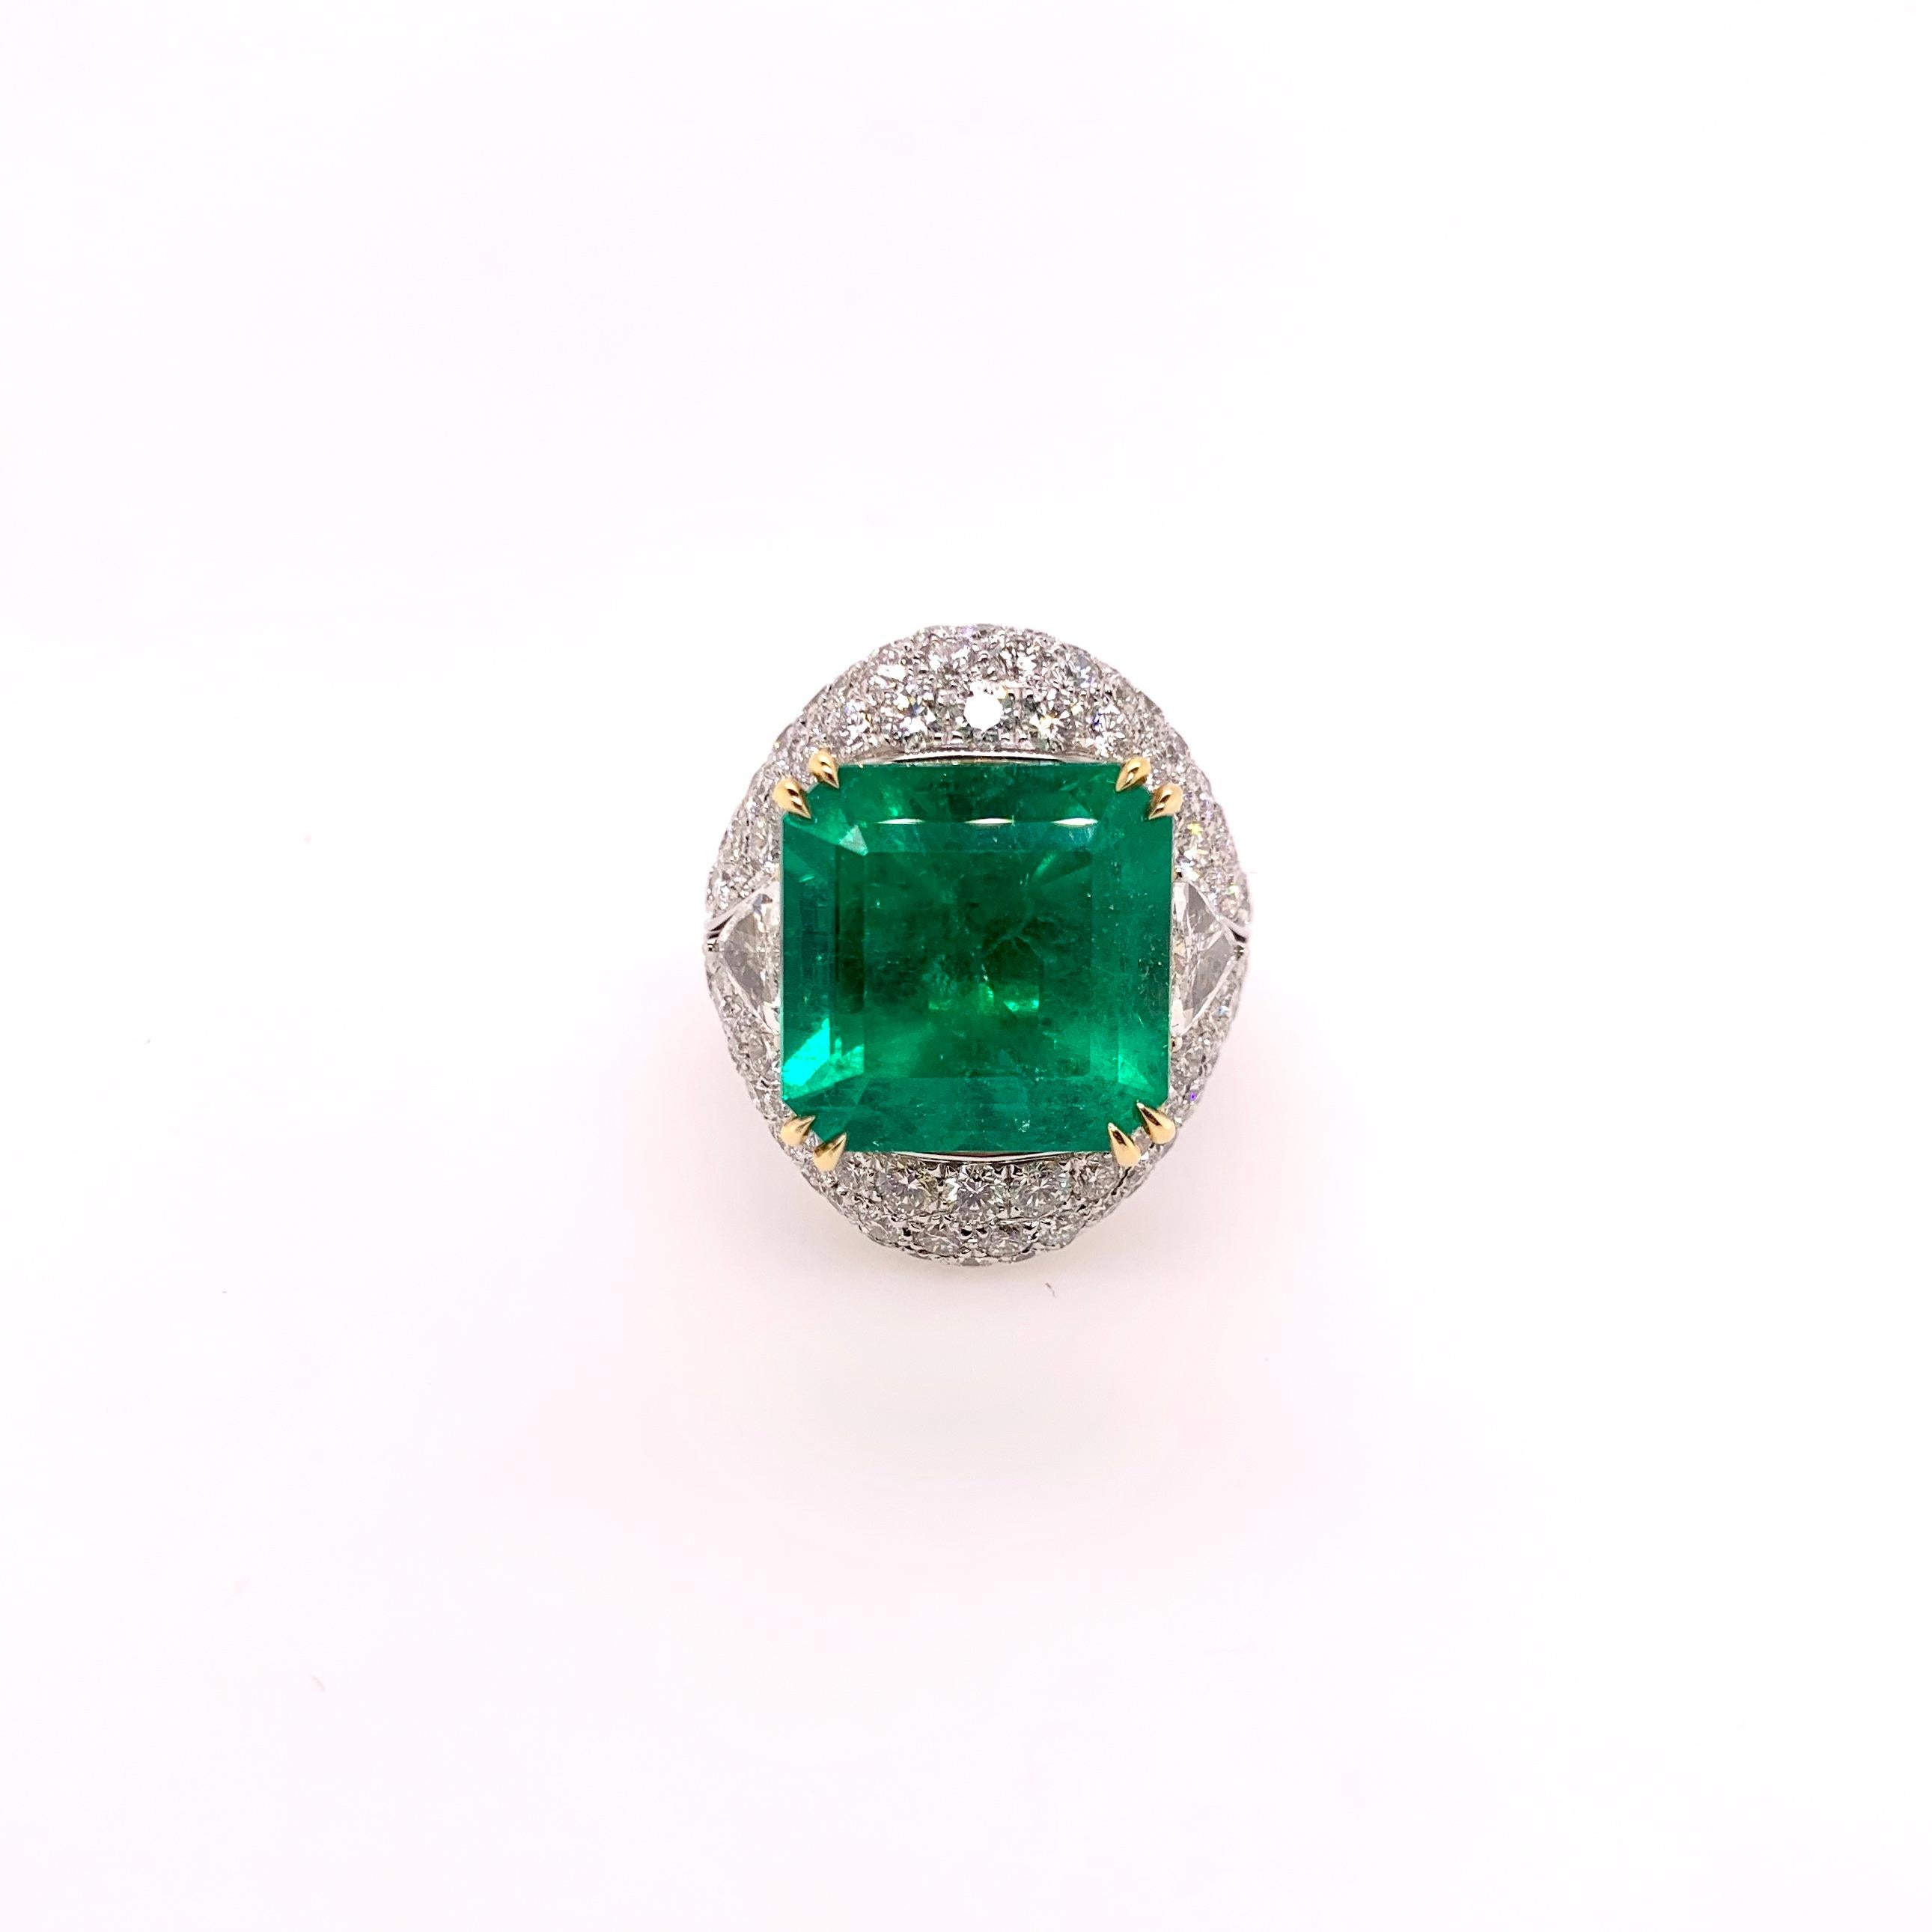 This extraordinary Colombian Emerald ring (with GRS Certificate) can be worn in a classic 3-stone style or in an elaborate diamond jacket. The Emerald is set in a custom diamond setting with trillion cut diamonds on the side and round pave diamonds